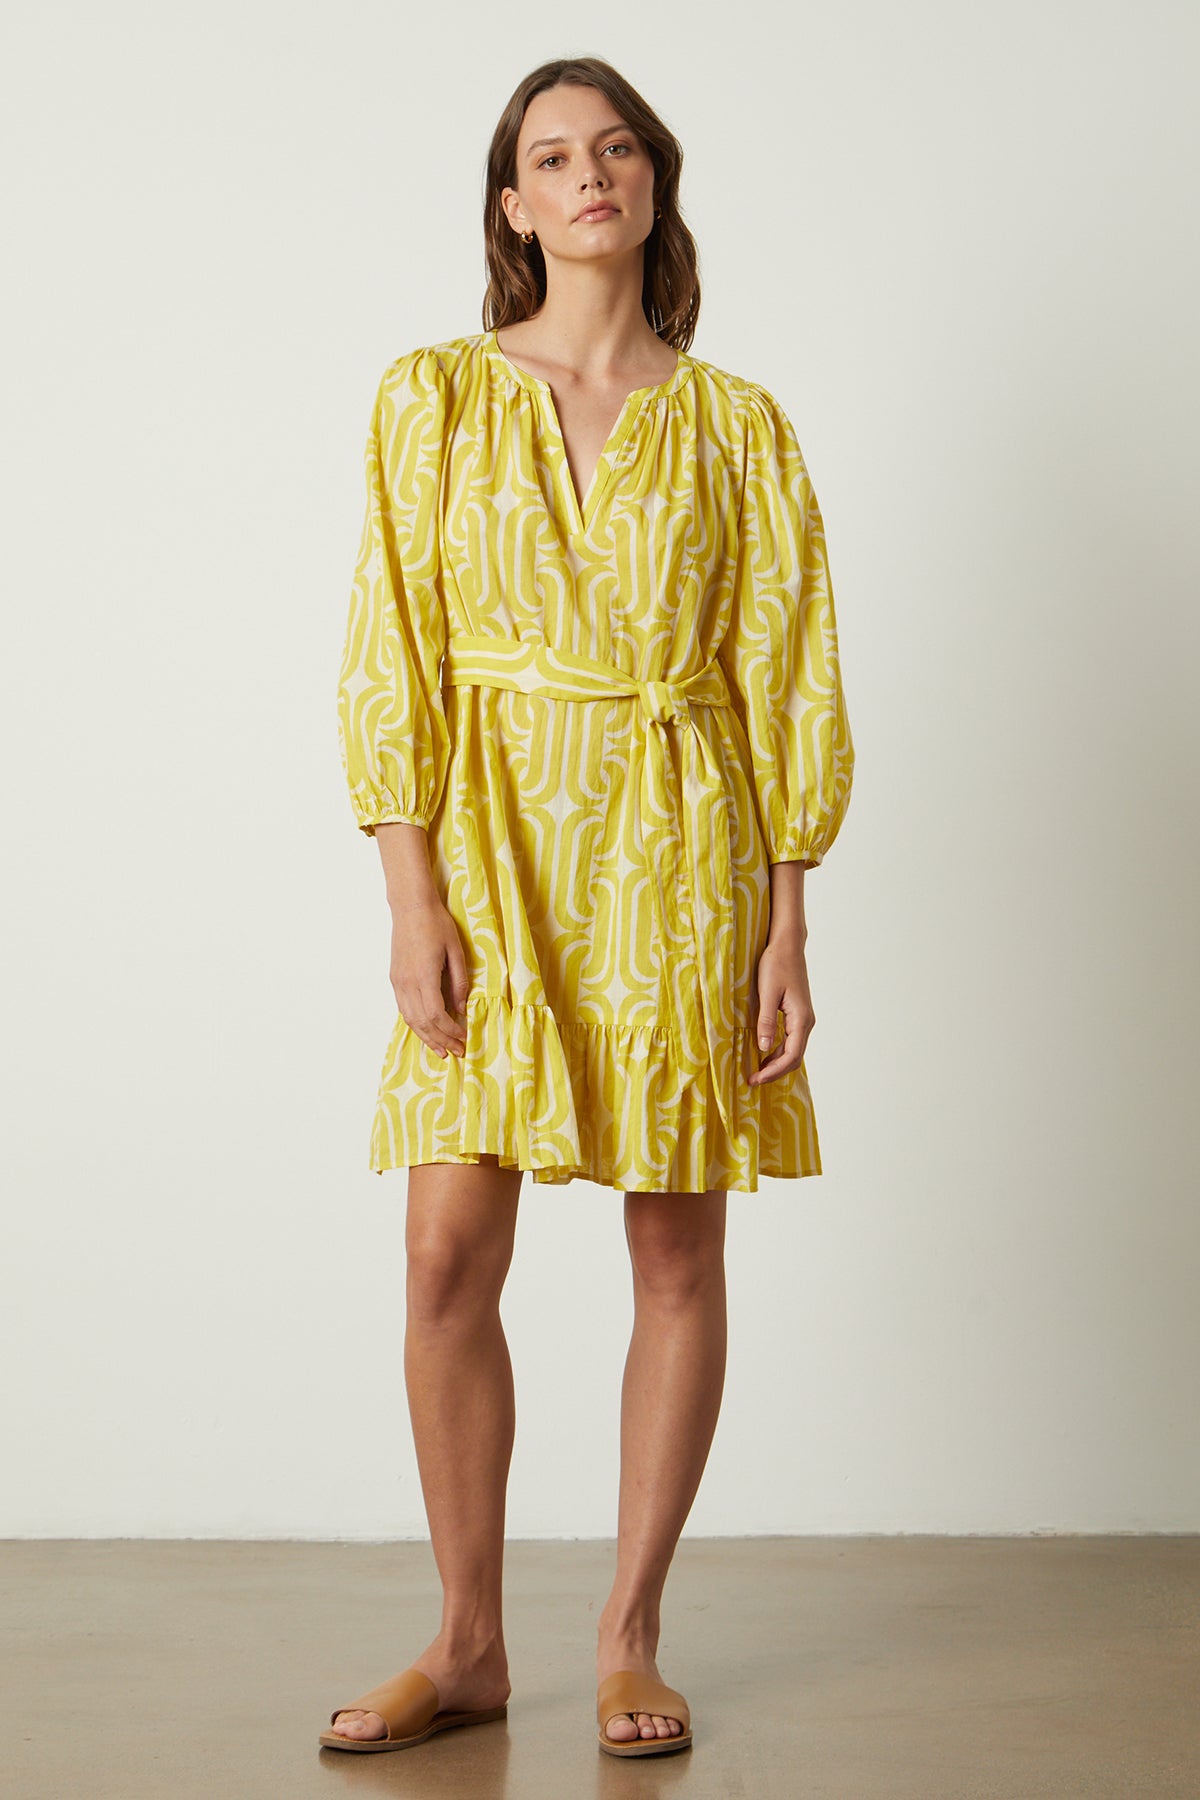 A woman wearing a yellow FELICITY PRINTED BOHO DRESS by Velvet by Graham & Spencer with mod-inspired print and sandals.-26235560984769